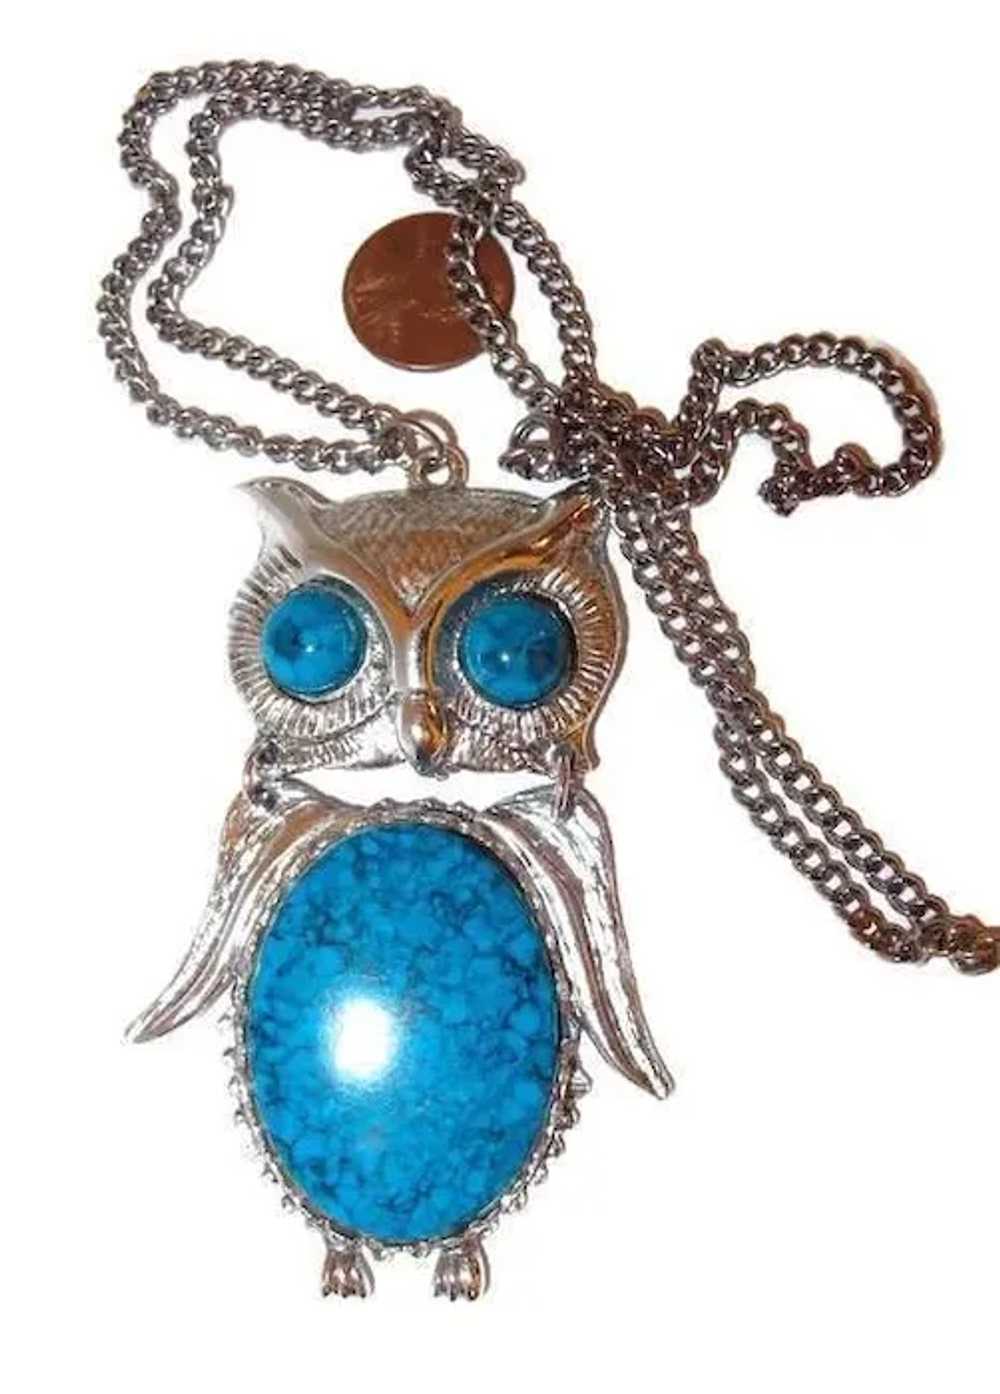 Articulated Owl Faux Turquoise Pendant Necklace - image 3